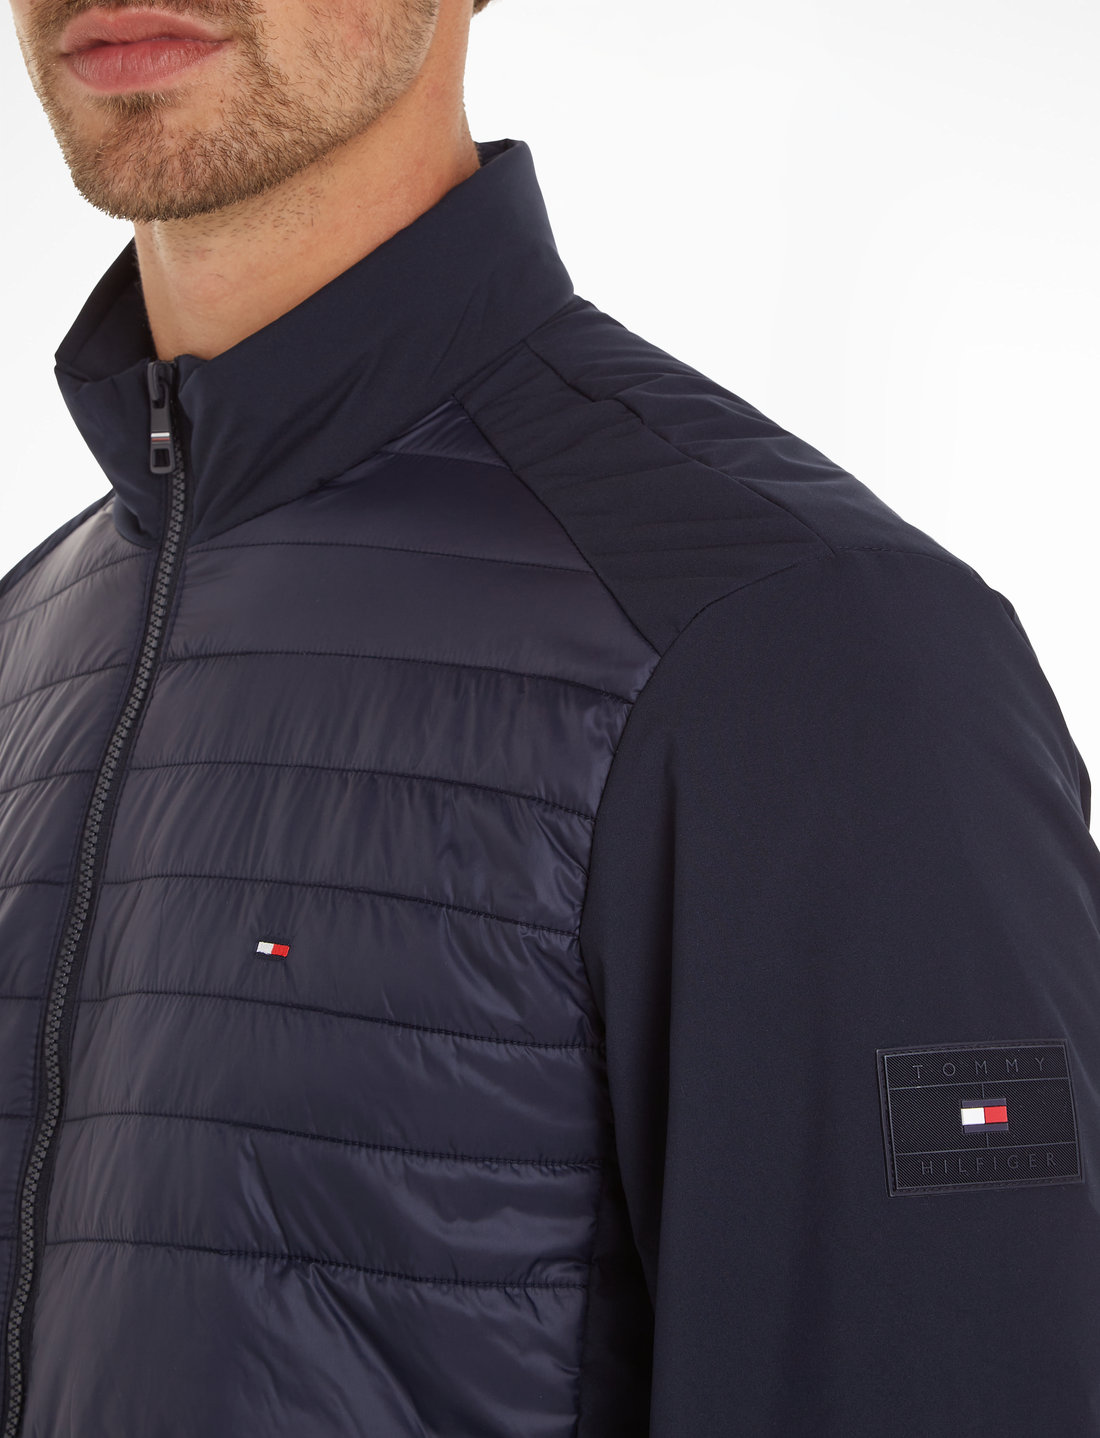 Tommy Hilfiger Cl Mix Media Stand Collar Jacket - 129.94 €. Buy Quilted  jackets from Tommy Hilfiger online at Boozt.com. Fast delivery and easy  returns